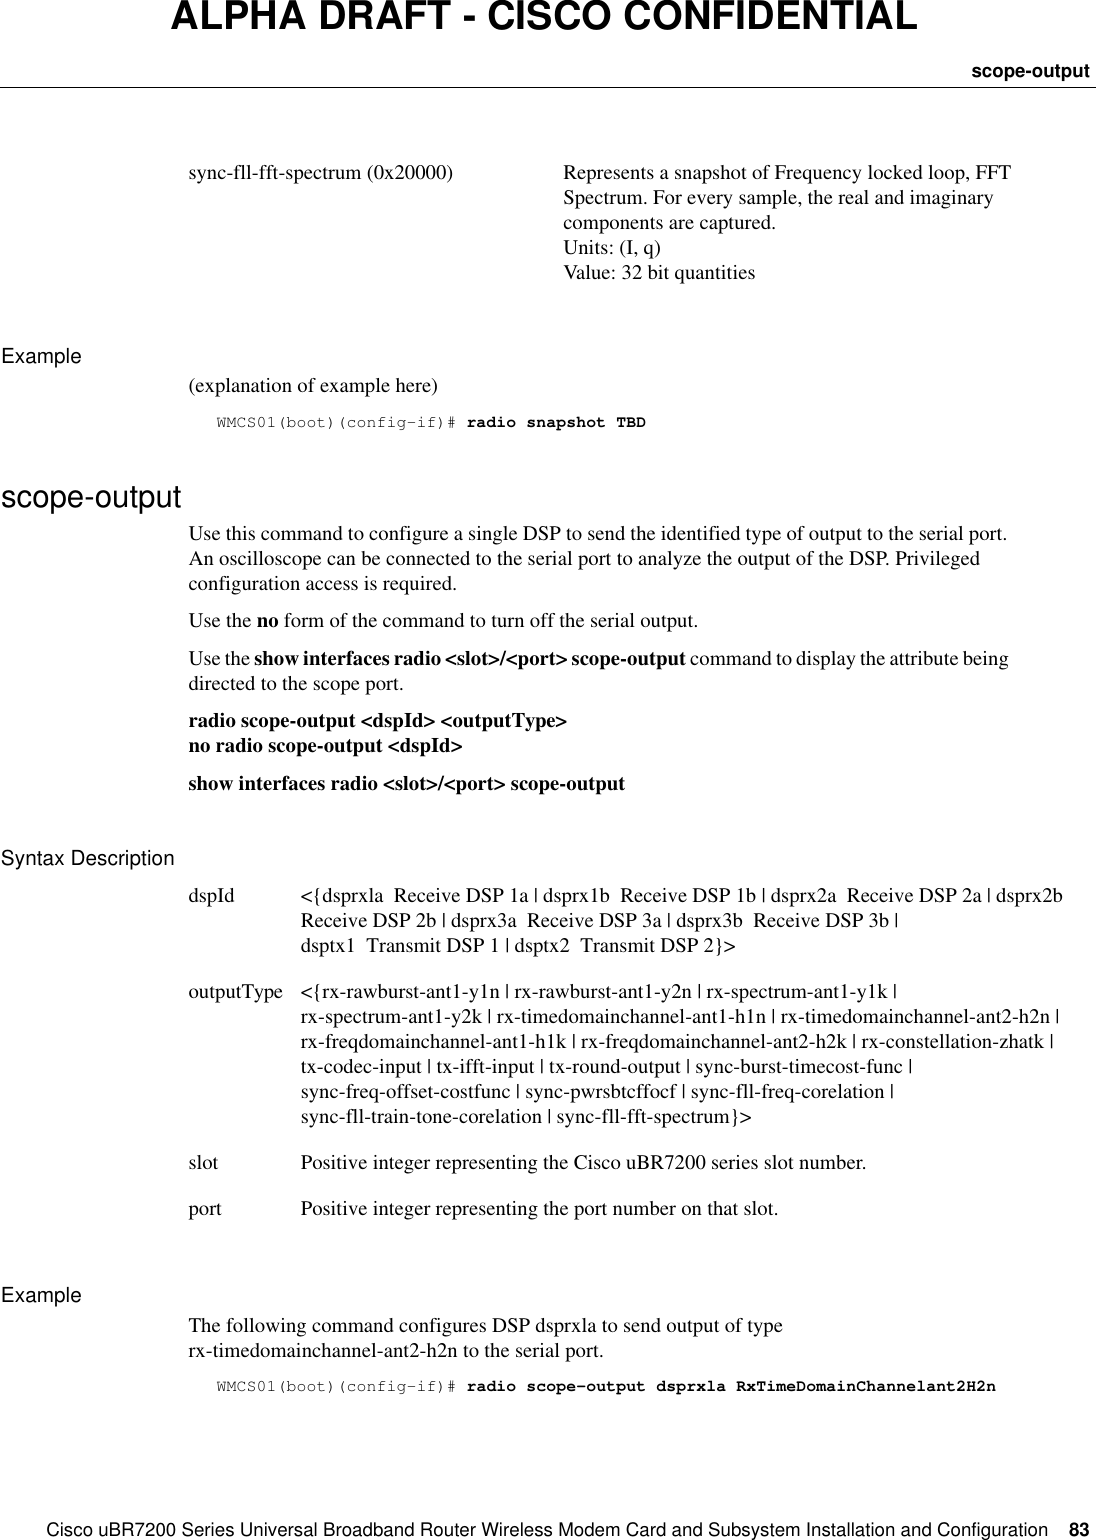 CiscouBR7200 Series Universal Broadband Router Wireless Modem Card and Subsystem Installation and Configuration  83scope-outputALPHA DRAFT - CISCO CONFIDENTIALExample(explanation of example here)WMCS01(boot)(config-if)# radio snapshot TBDscope-outputUse this command to configure a single DSP to send the identified type of output to the serial port. An oscilloscope can be connected to the serial port to analyze the output of the DSP. Privileged configuration access is required.Use the no form of the command to turn off the serial output.Use the show interfaces radio &lt;slot&gt;/&lt;port&gt; scope-output command to display the attribute being directed to the scope port.radio scope-output &lt;dspId&gt; &lt;outputType&gt;no radio scope-output &lt;dspId&gt;show interfaces radio &lt;slot&gt;/&lt;port&gt; scope-outputSyntax DescriptionExampleThe following command configures DSP dsprxla to send output of type rx-timedomainchannel-ant2-h2n to the serial port.WMCS01(boot)(config-if)# radio scope-output dsprxla RxTimeDomainChannelant2H2nsync-fll-fft-spectrum (0x20000) Represents a snapshot of Frequency locked loop, FFT Spectrum. For every sample, the real and imaginary components are captured.Units: (I, q)Value: 32 bit quantitiesdspId &lt;{dsprxla  Receive DSP 1a | dsprx1b  Receive DSP 1b | dsprx2a  Receive DSP 2a | dsprx2b  Receive DSP 2b | dsprx3a  Receive DSP 3a | dsprx3b  Receive DSP 3b | dsptx1  Transmit DSP 1 | dsptx2  Transmit DSP 2}&gt;outputType &lt;{rx-rawburst-ant1-y1n | rx-rawburst-ant1-y2n | rx-spectrum-ant1-y1k | rx-spectrum-ant1-y2k | rx-timedomainchannel-ant1-h1n | rx-timedomainchannel-ant2-h2n | rx-freqdomainchannel-ant1-h1k | rx-freqdomainchannel-ant2-h2k | rx-constellation-zhatk | tx-codec-input | tx-ifft-input | tx-round-output | sync-burst-timecost-func | sync-freq-offset-costfunc | sync-pwrsbtcffocf | sync-fll-freq-corelation | sync-fll-train-tone-corelation | sync-fll-fft-spectrum}&gt;slot Positive integer representing the CiscouBR7200 series slot number.port Positive integer representing the port number on that slot.